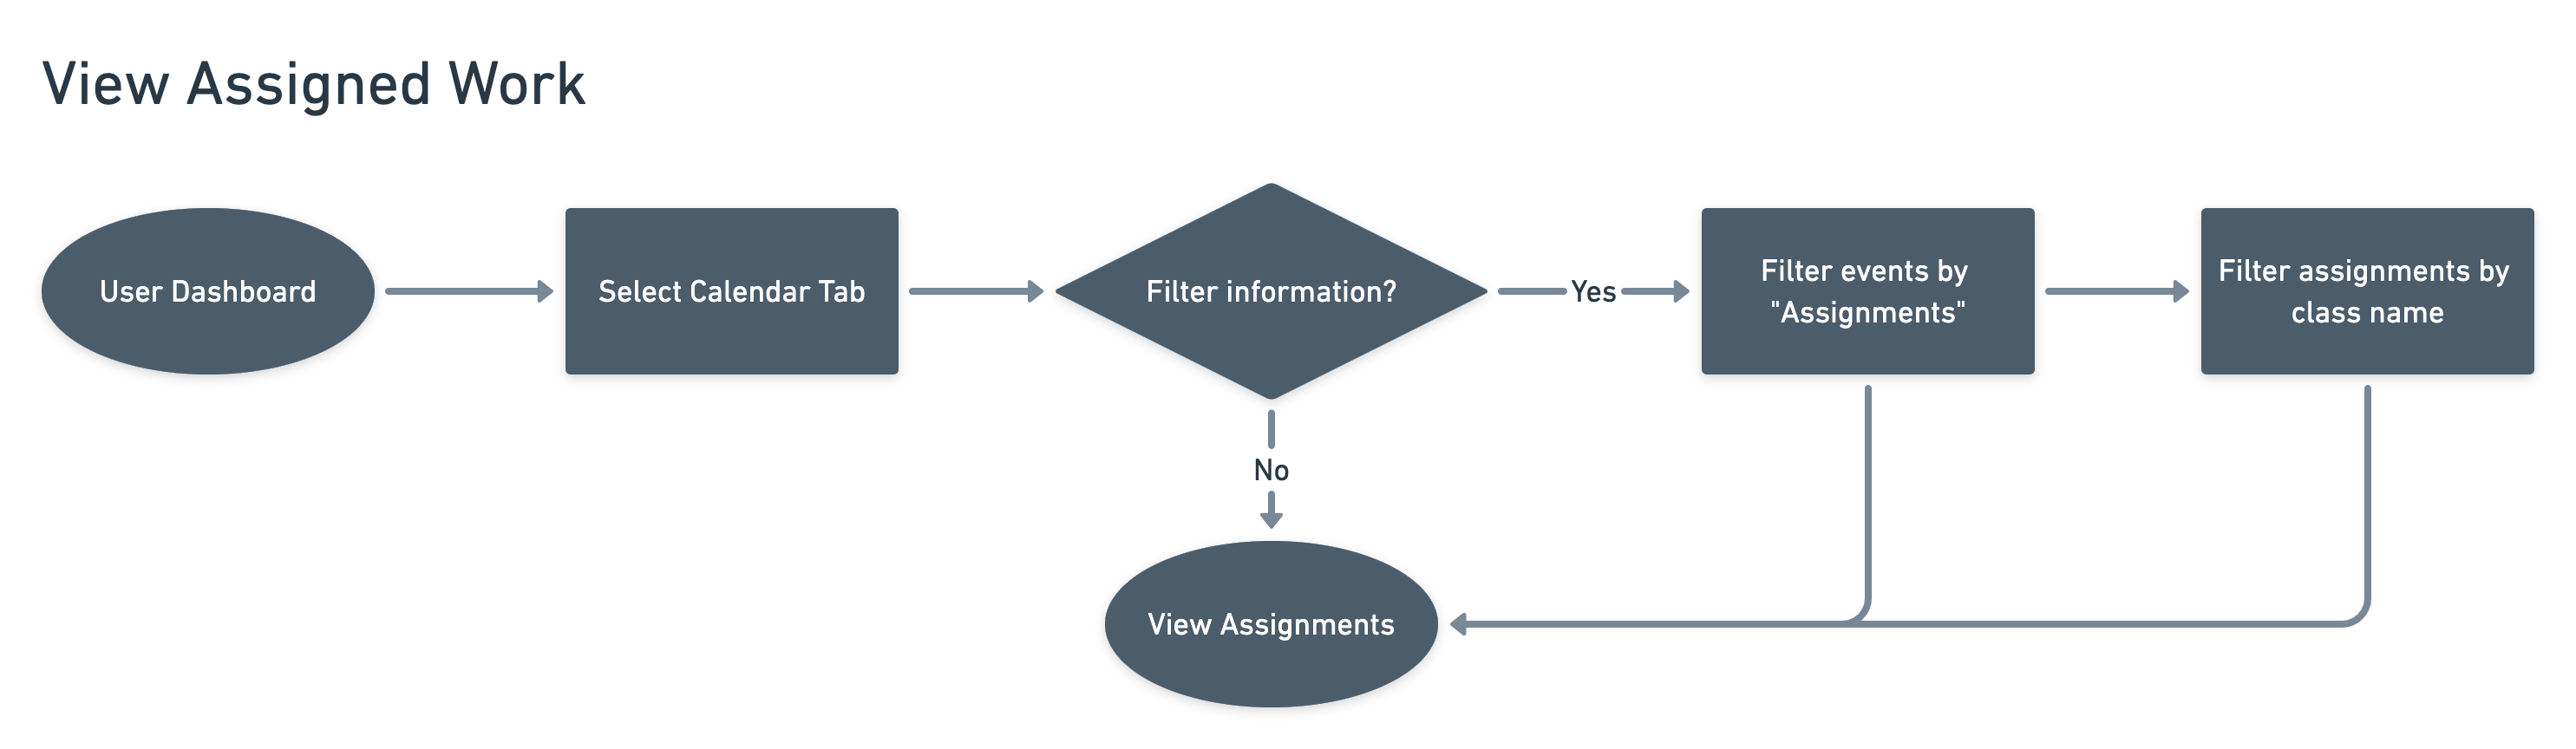 User Flow for viewing assigned work